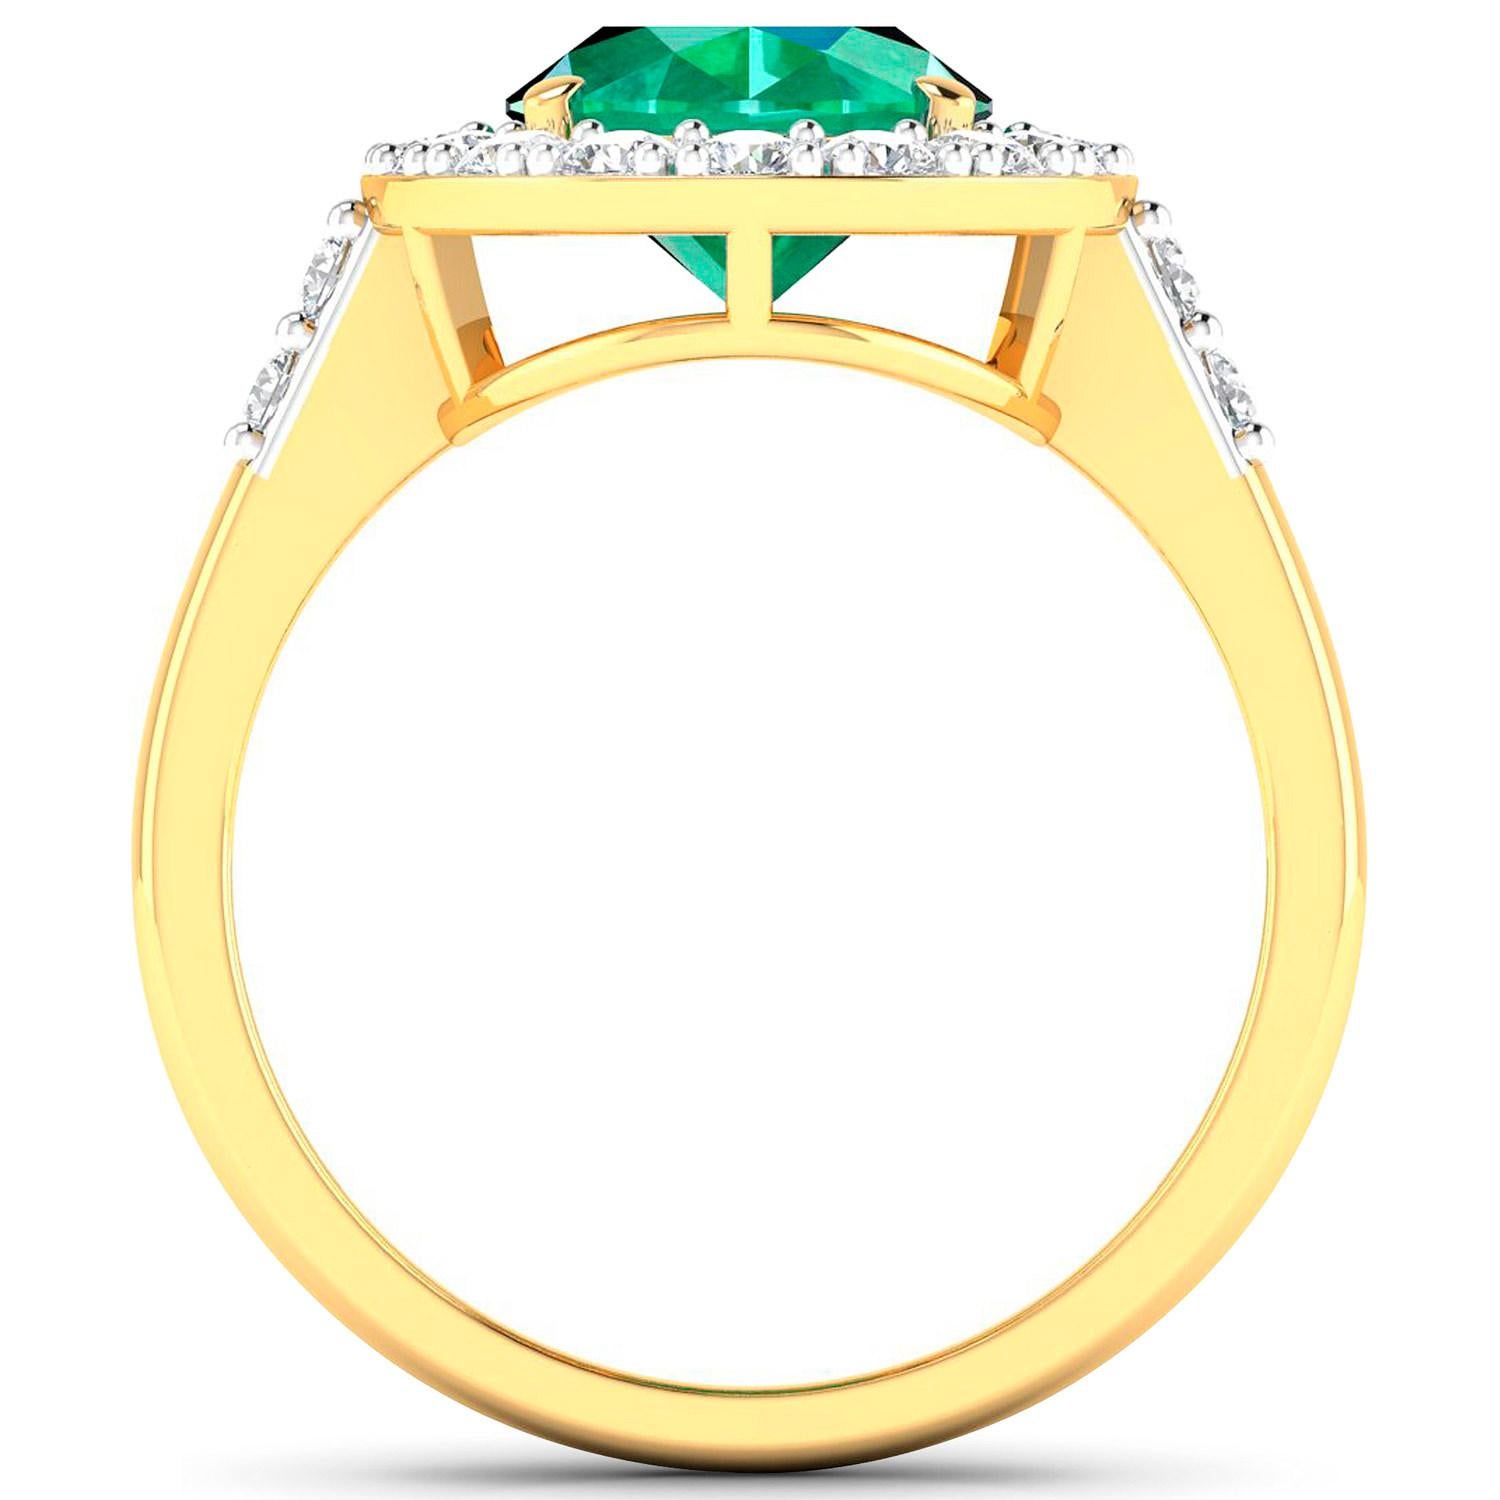 Zambian Emerald Ring With Diamonds 3.04 Carats 14K Yellow Gold In Excellent Condition For Sale In Laguna Niguel, CA